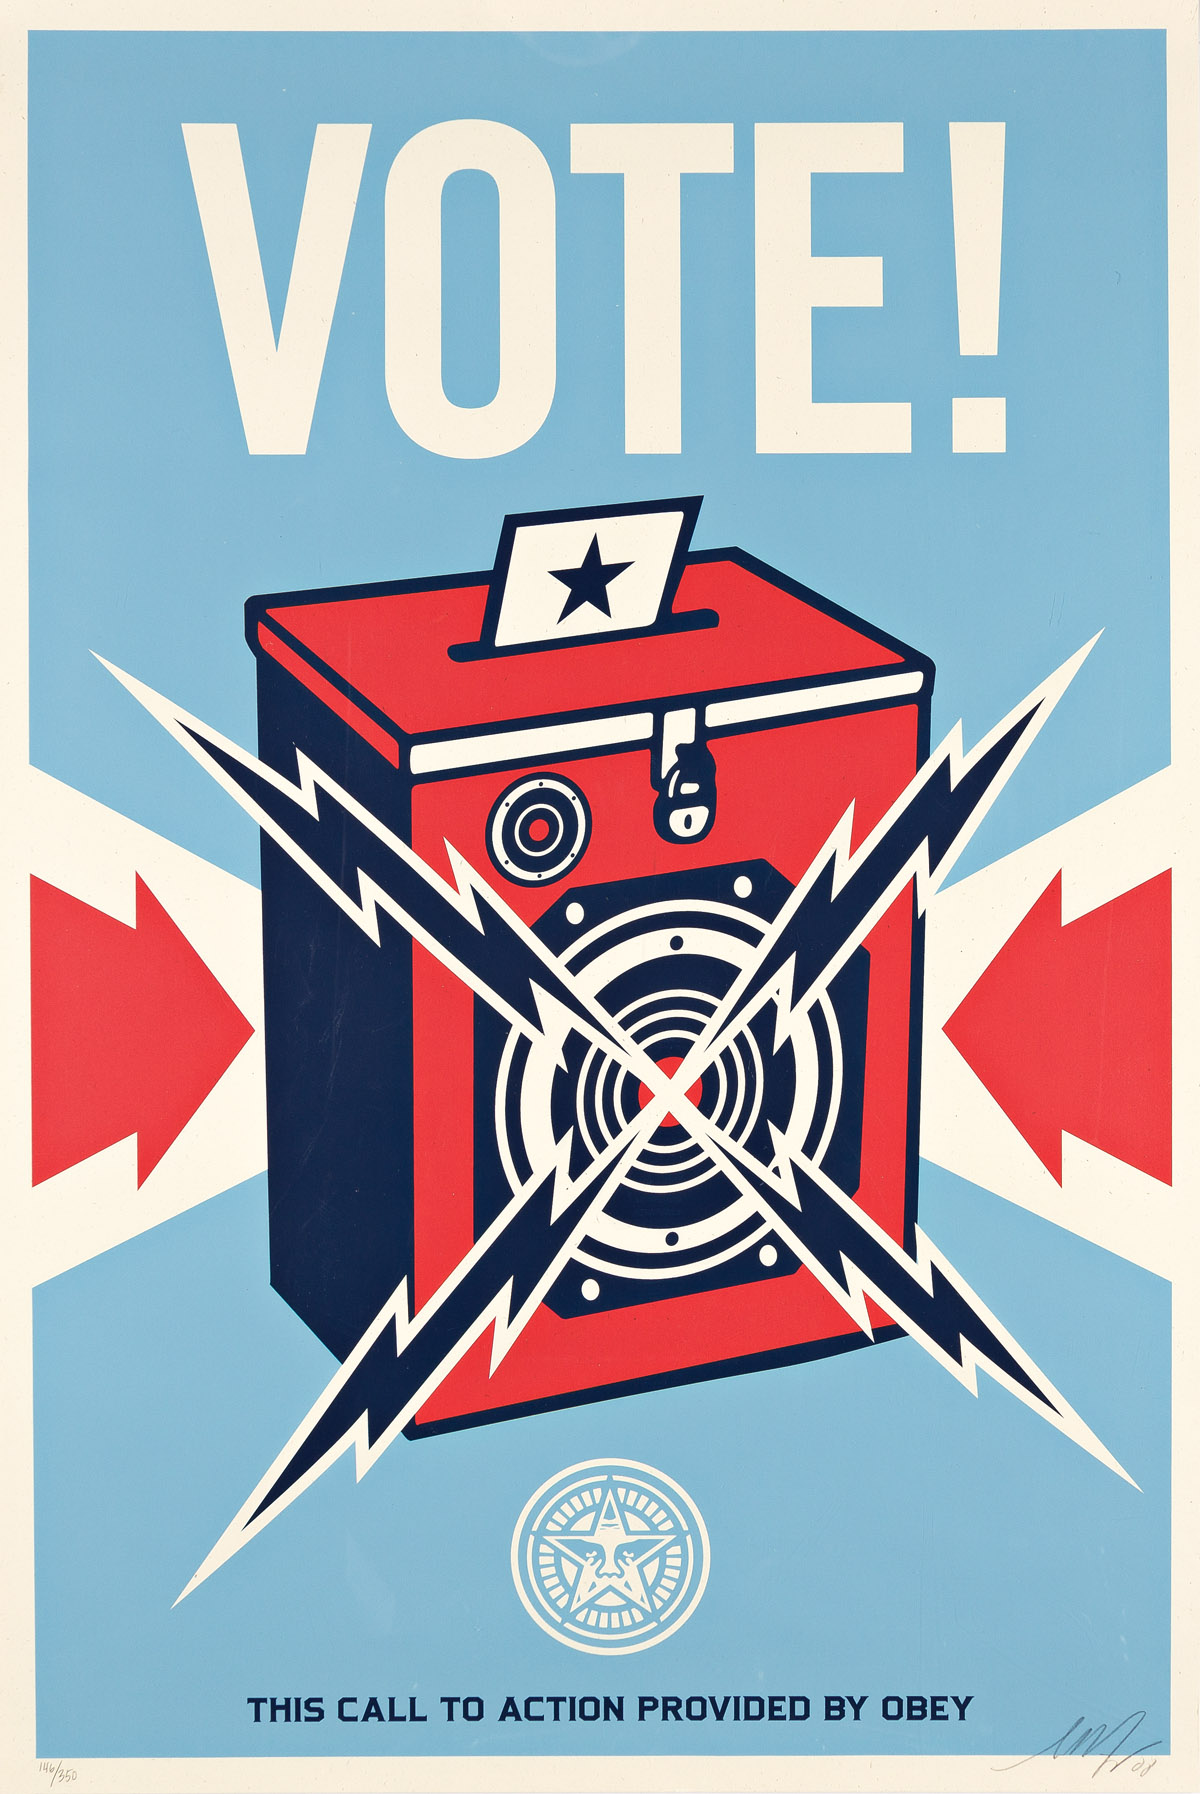 FAIREY, SHEPARD. VOTE! This Call to Action Provided by Obey.